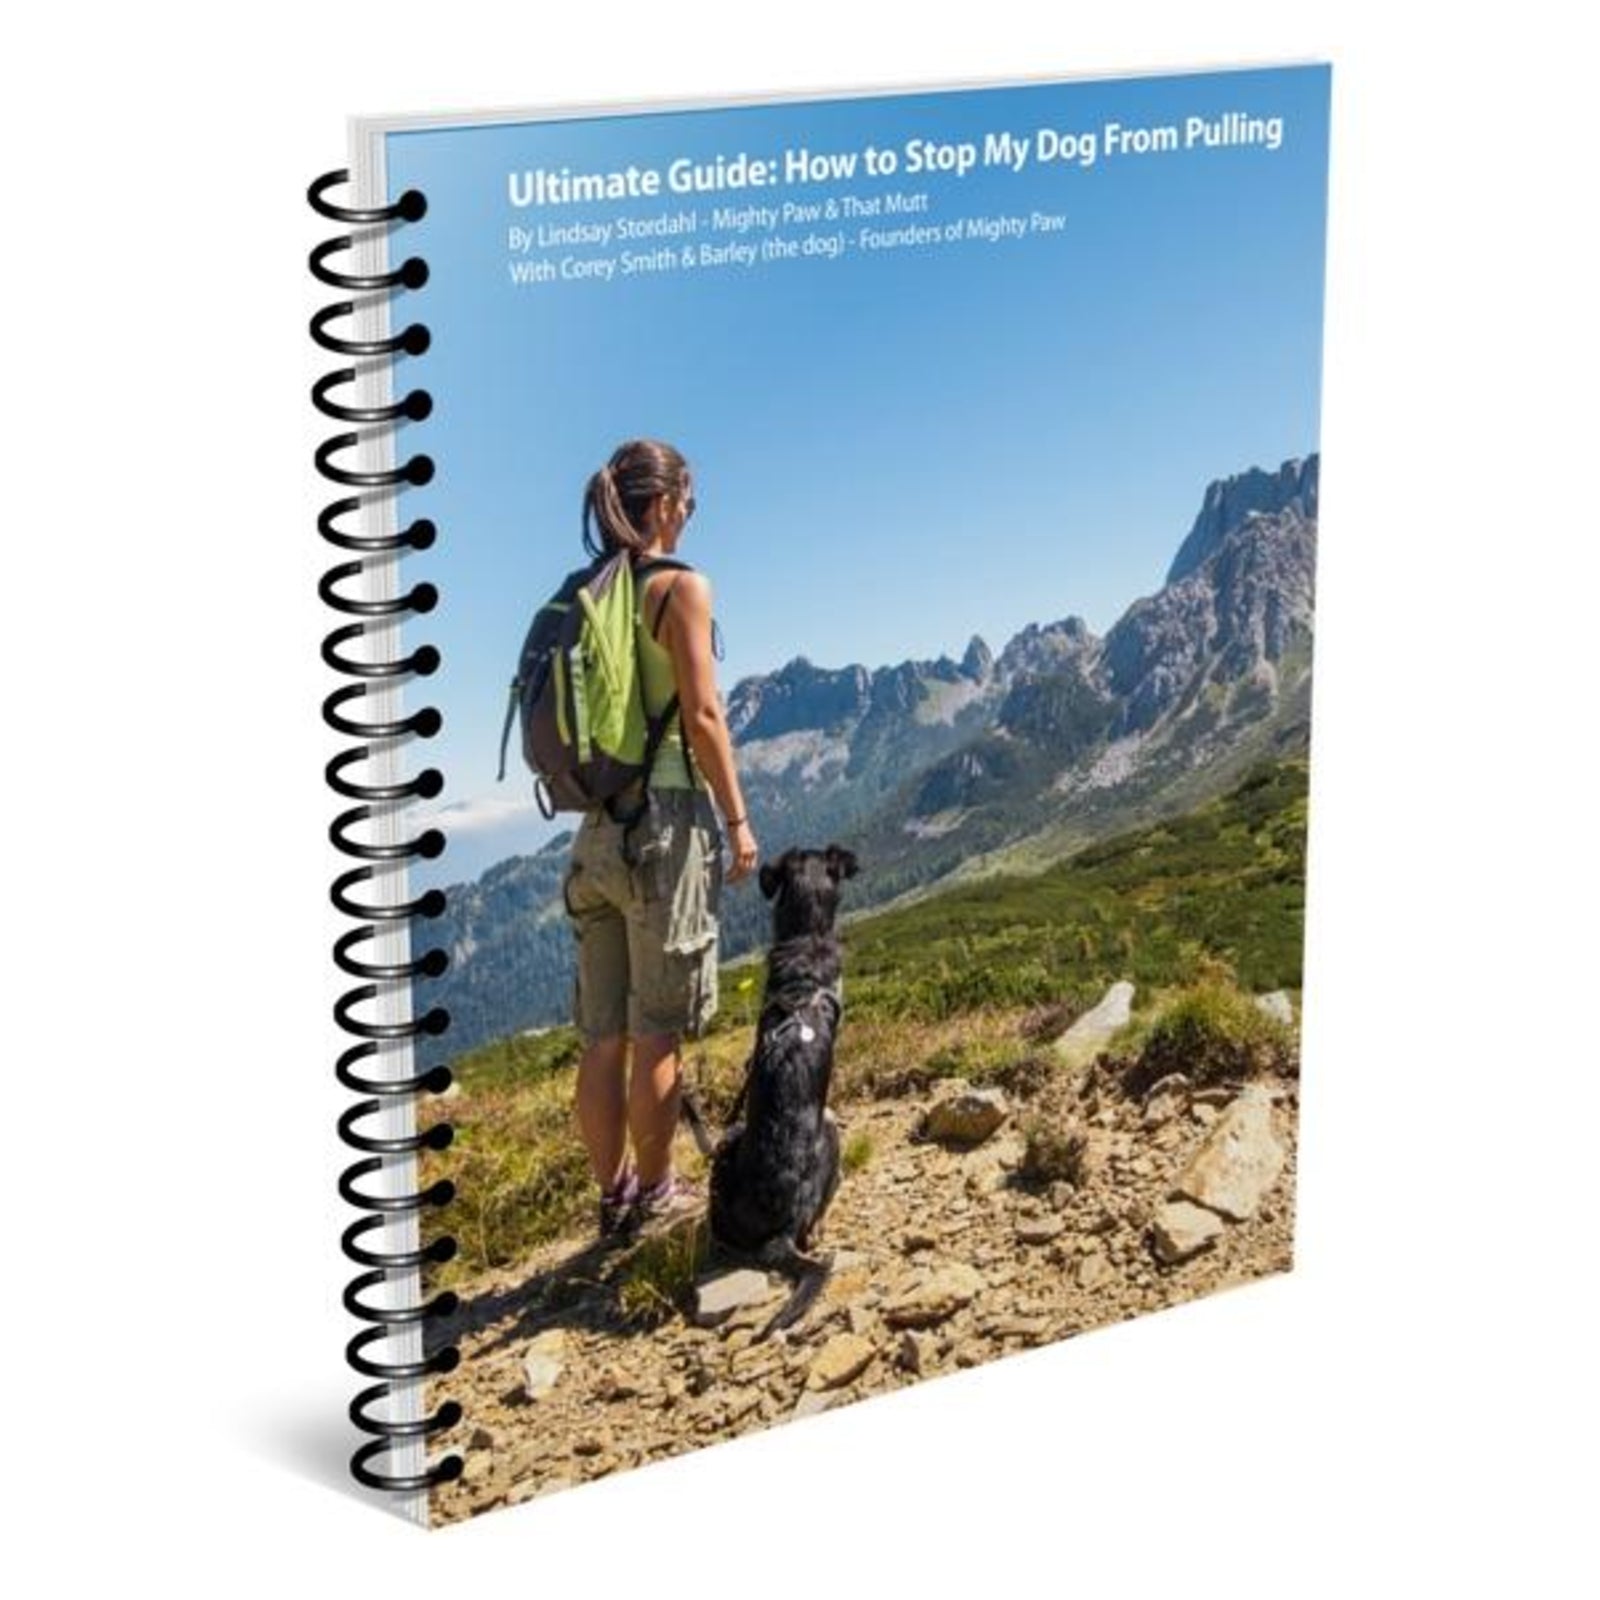 [Ebook] Ultimate Guide: How to Stop My Dog From Pulling